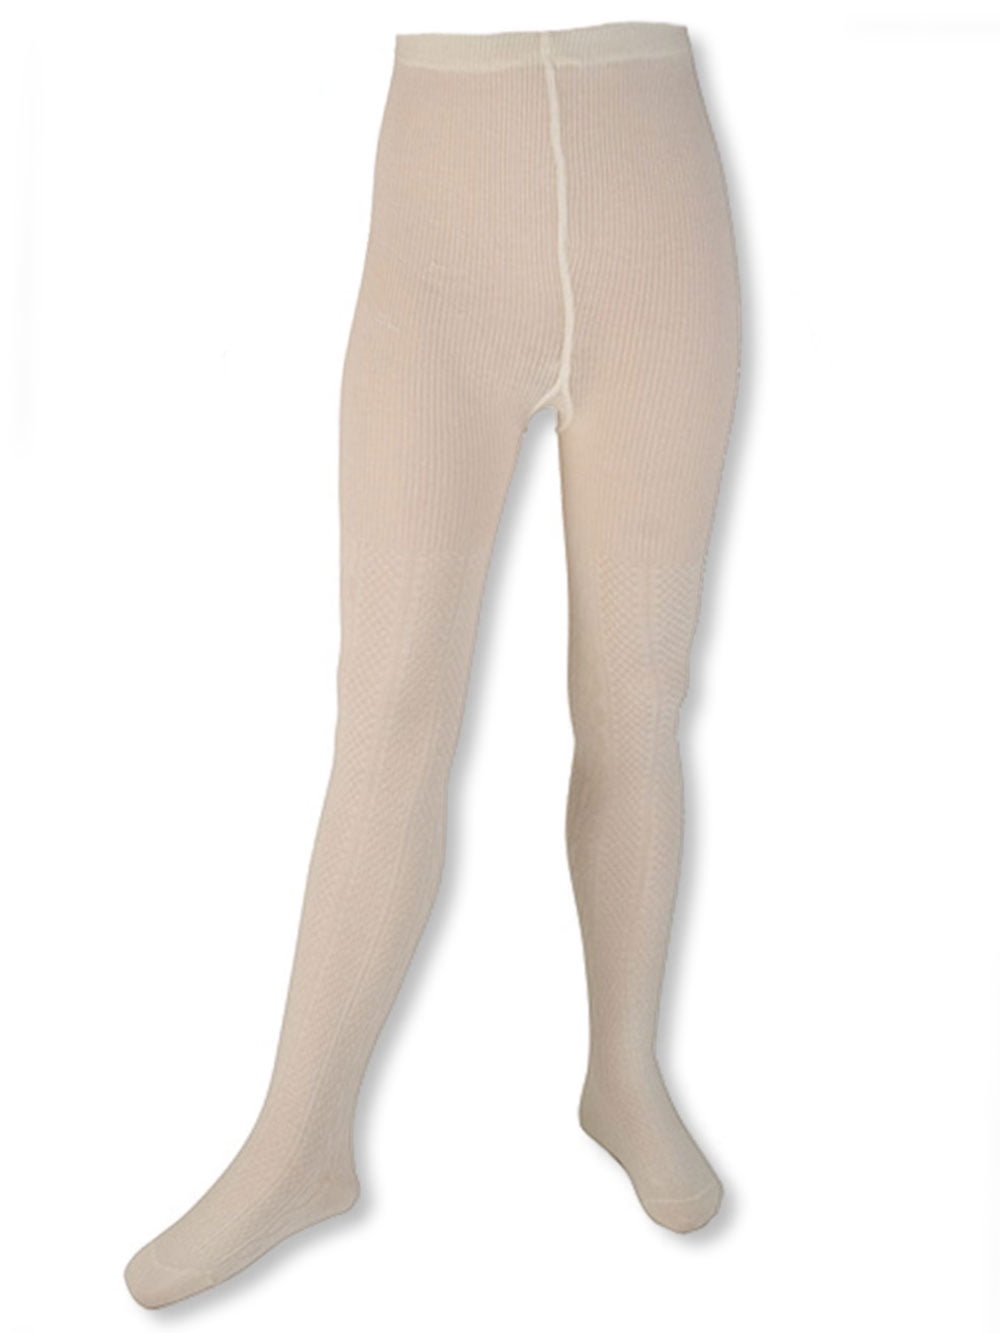 Cookie's Cable Knit Tights (Sizes 1 - 18) - cream, 12 - 14 (Big